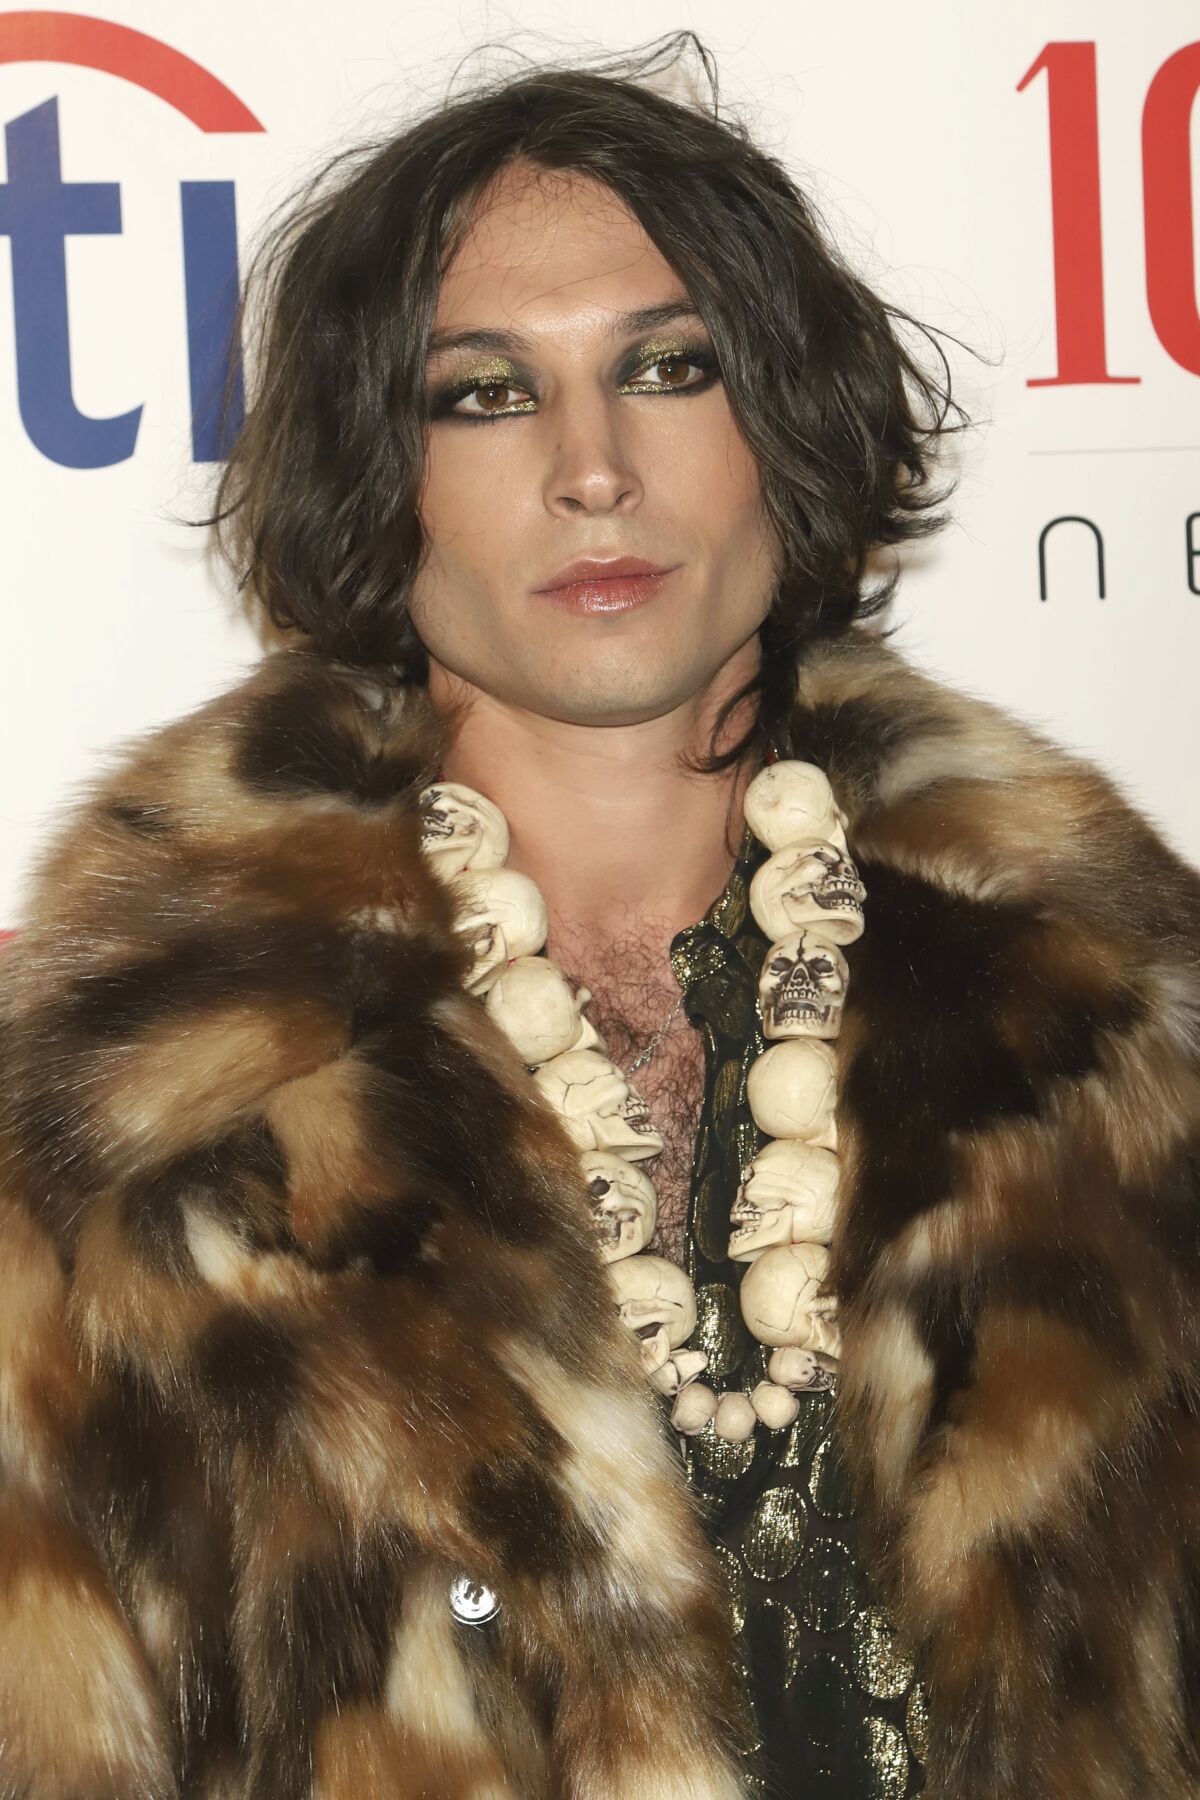 A person with sparkling eye makeup and dark hair wearing a fur coat.